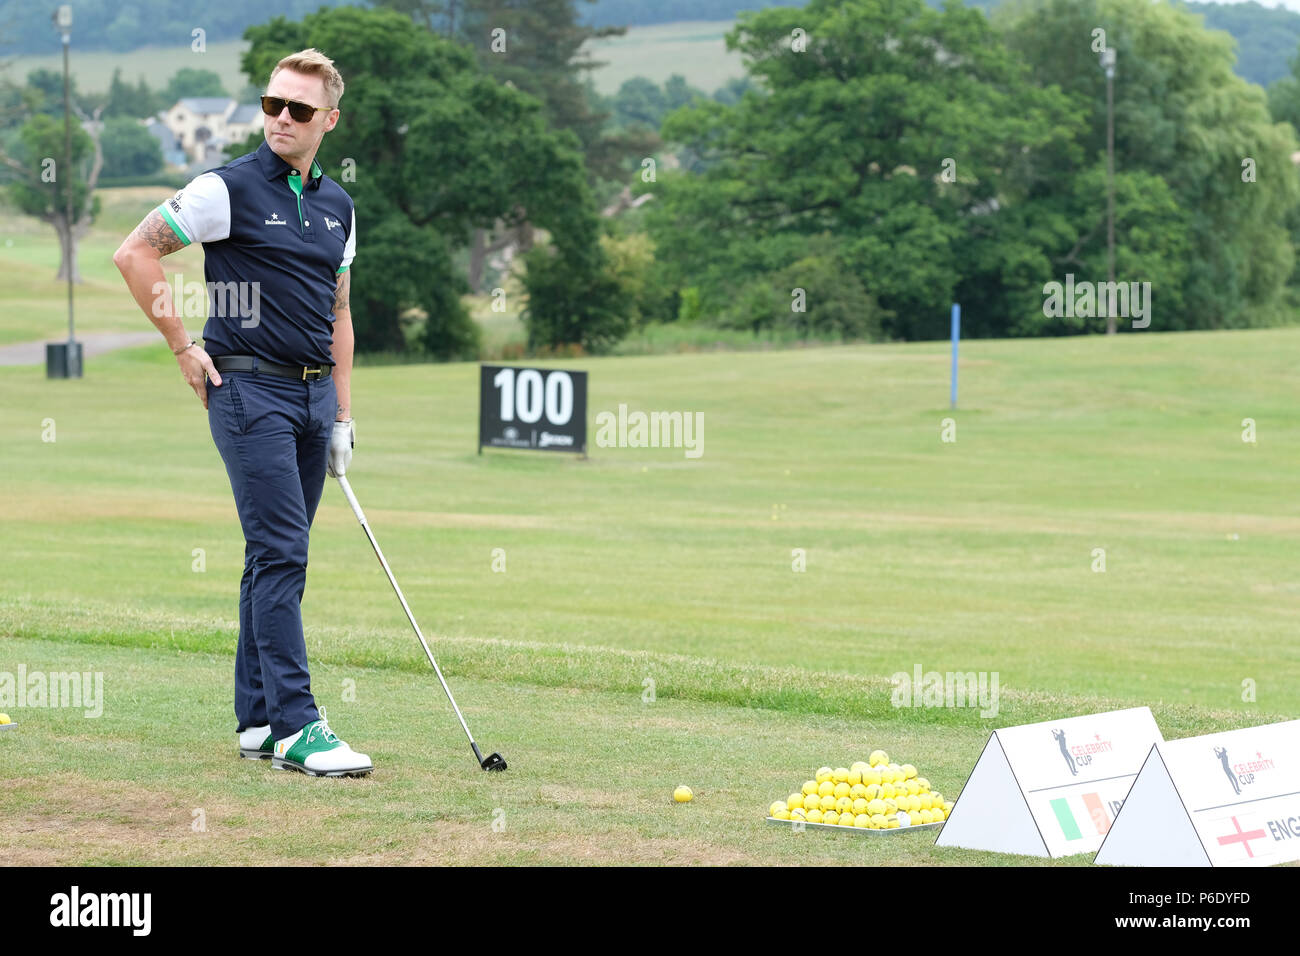 Newport, UK, 30 June 2018. Celebrity Cup golf tournament - Celtic Manor, Newport, Wales, UK - Saturday 30th June - Ronan Keating playing for Team Ireland warms up on the practice range. Photo Steven May / Alamy Live News Stock Photo